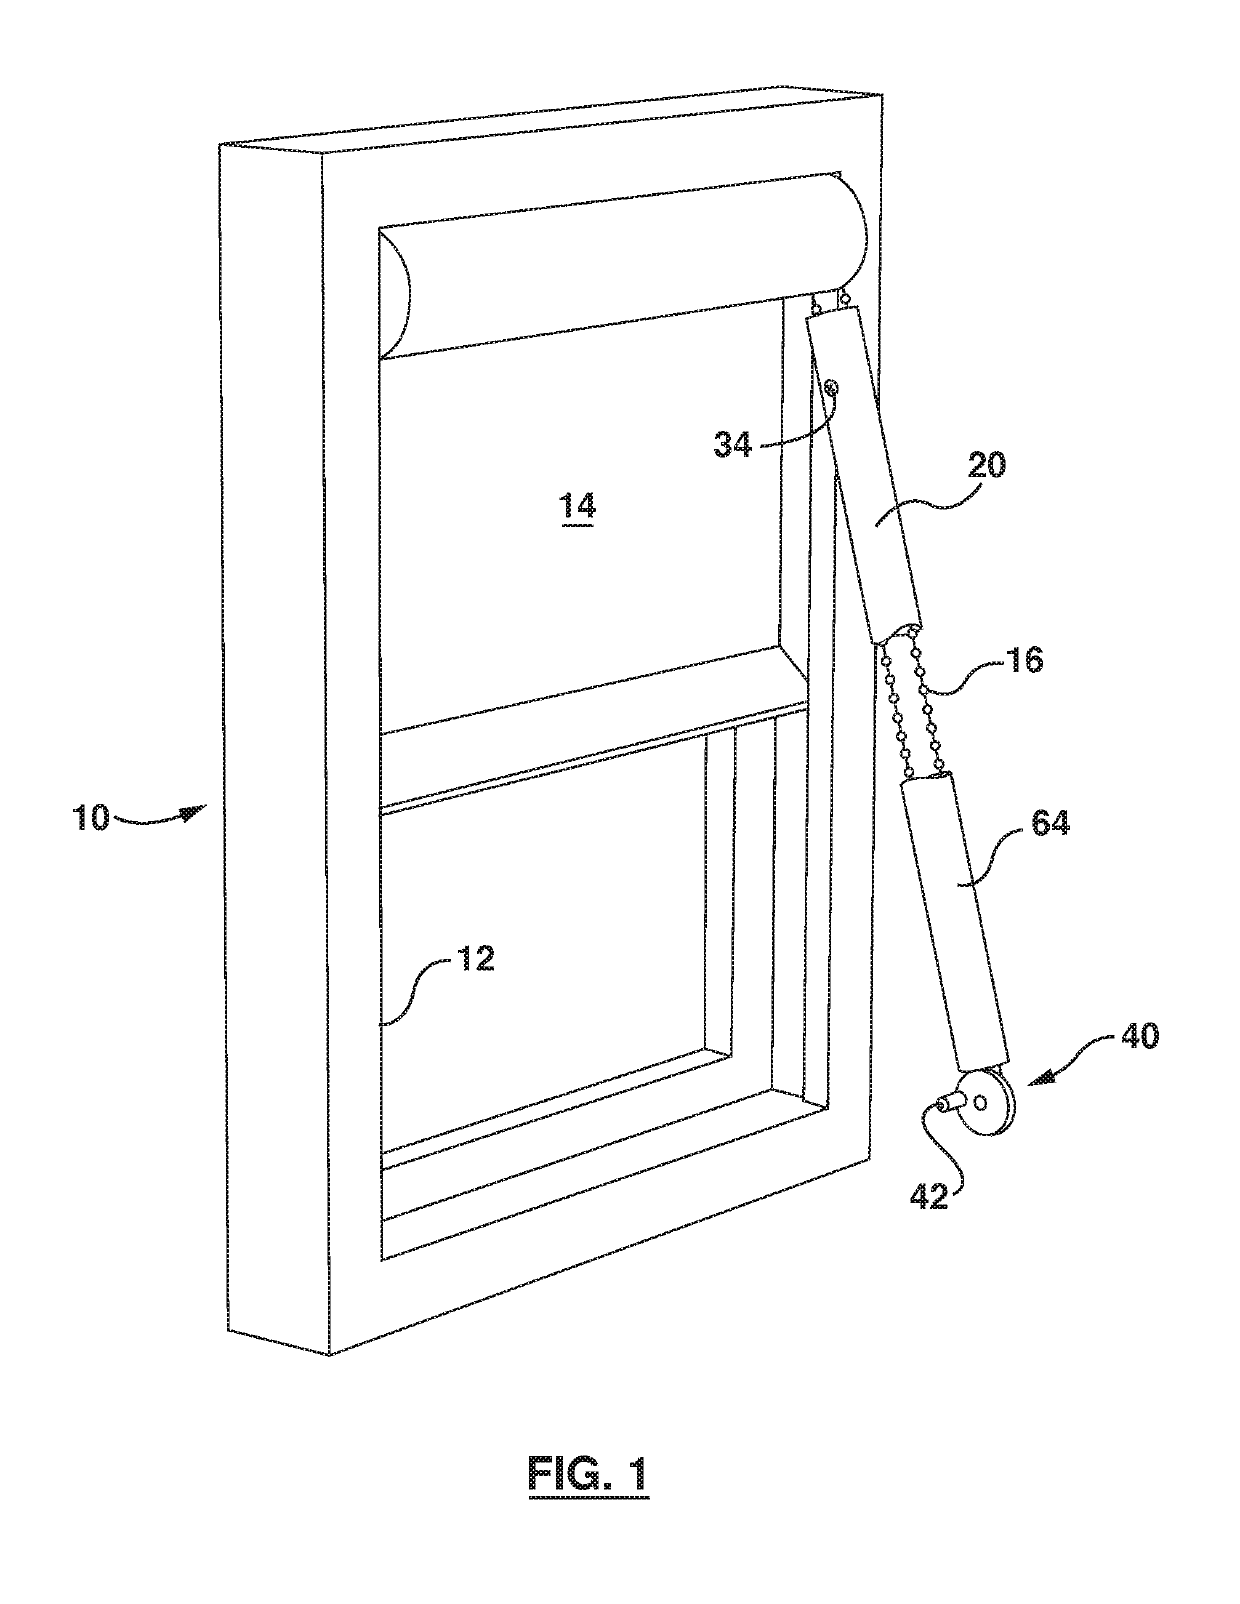 Enclosed blind control with opening and sliding member, and profile and multiple sprocket